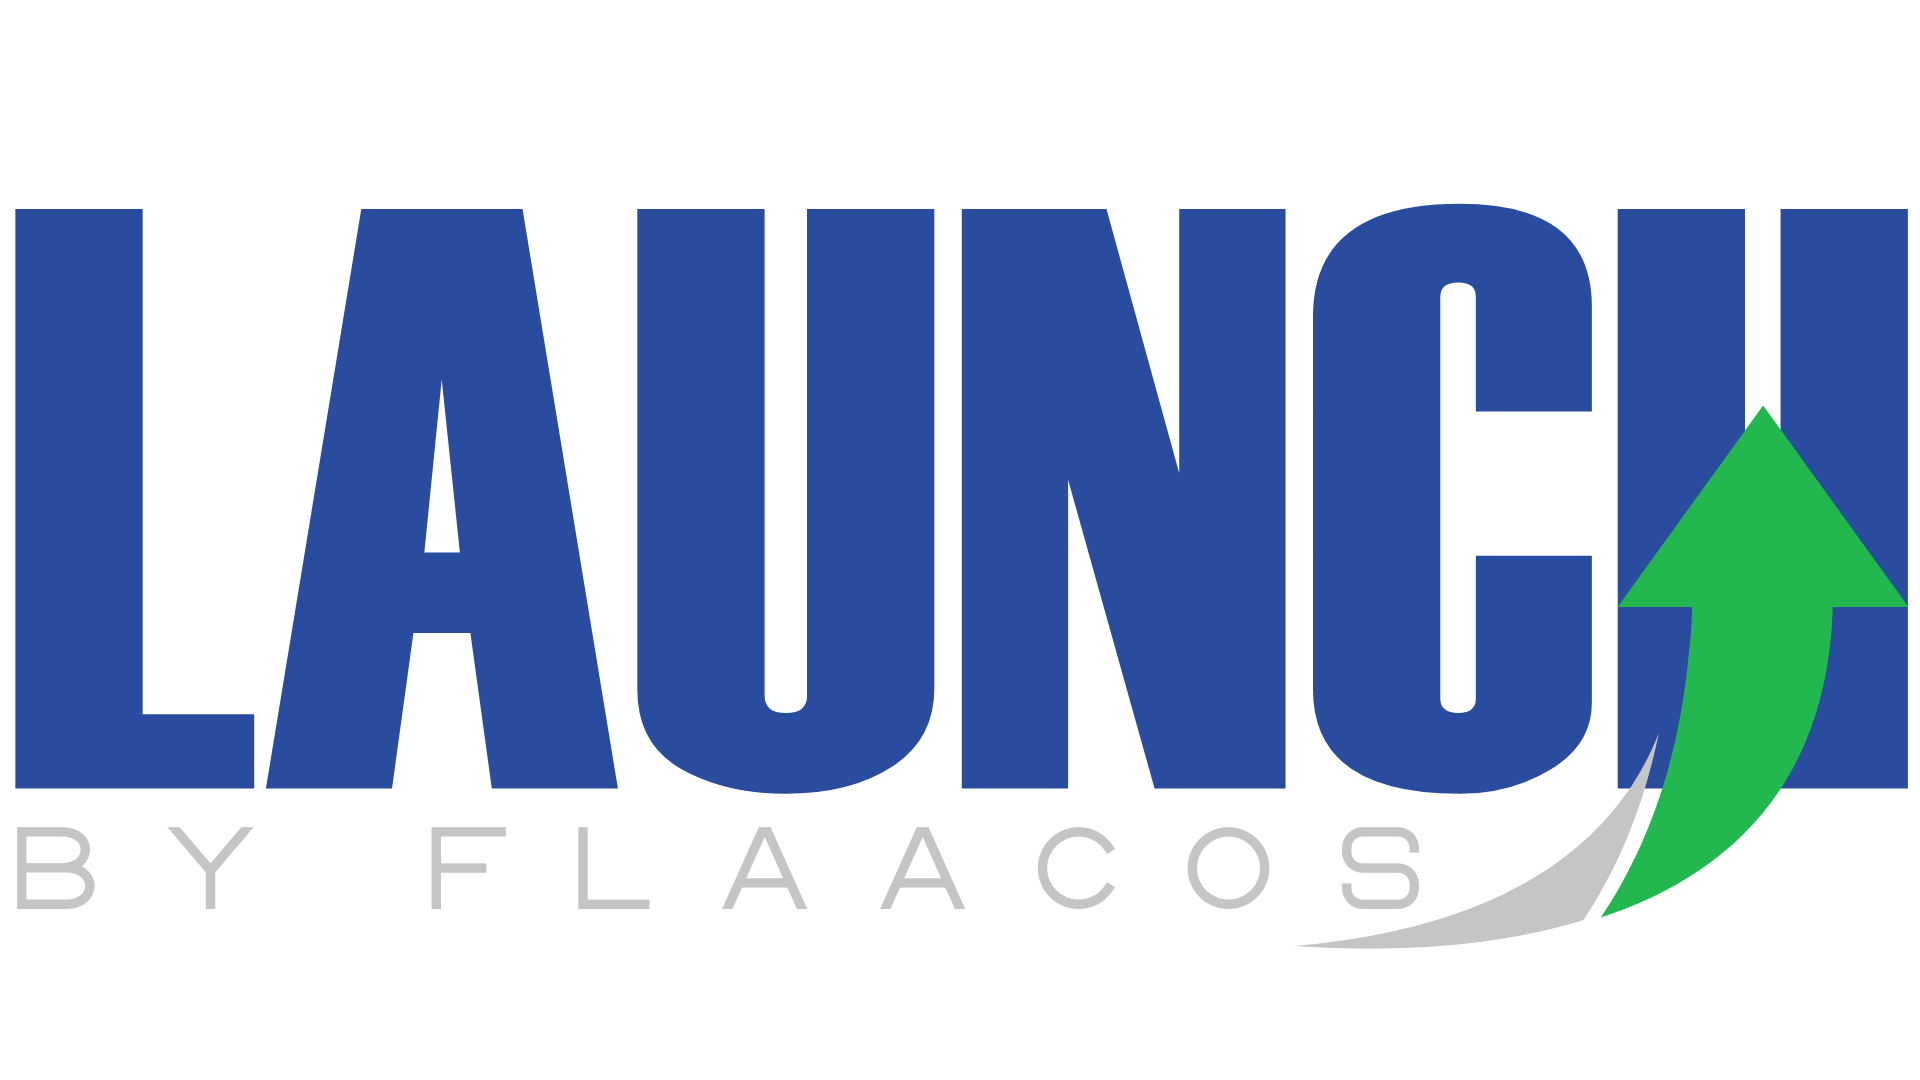 Sena Health Announces Strategic Partnership with LAUNCH by FLAACOs